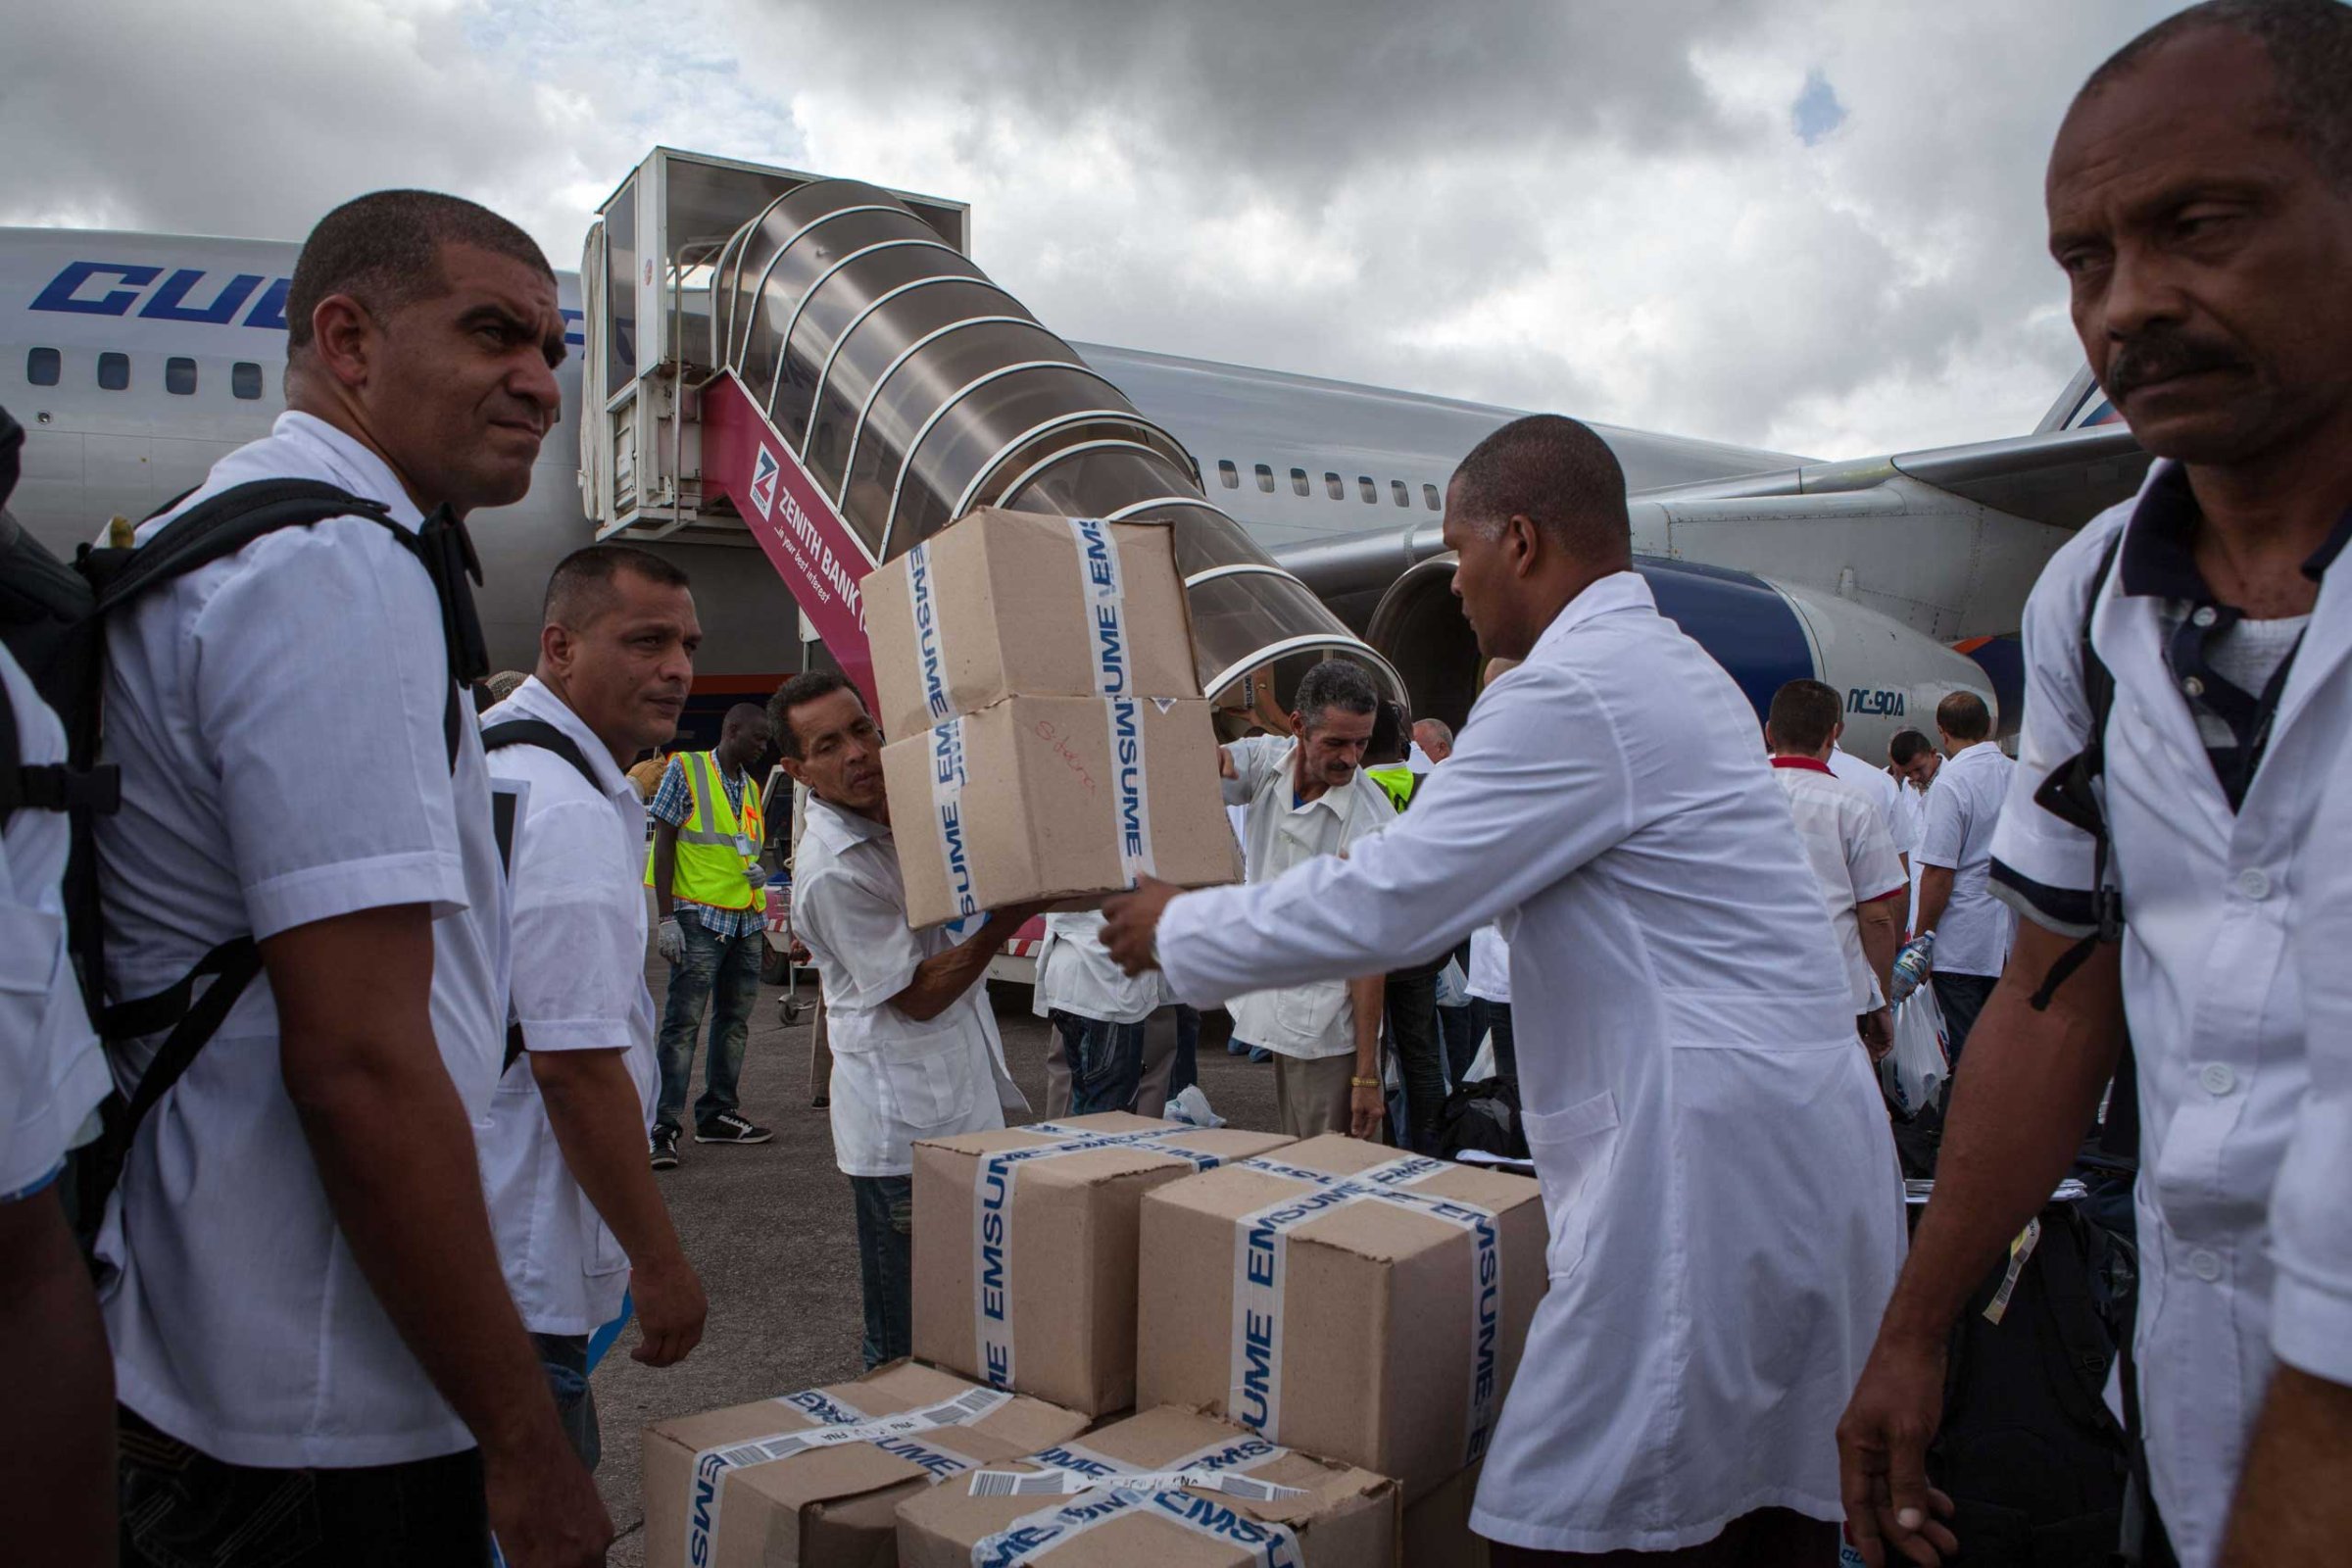 Cuban doctors and health workers unload boxes of medicines and medical material from a plane upon their arrival at Freetown's airport to help the fight against Ebola in Sierra Leone, on Oct. 2, 2014.